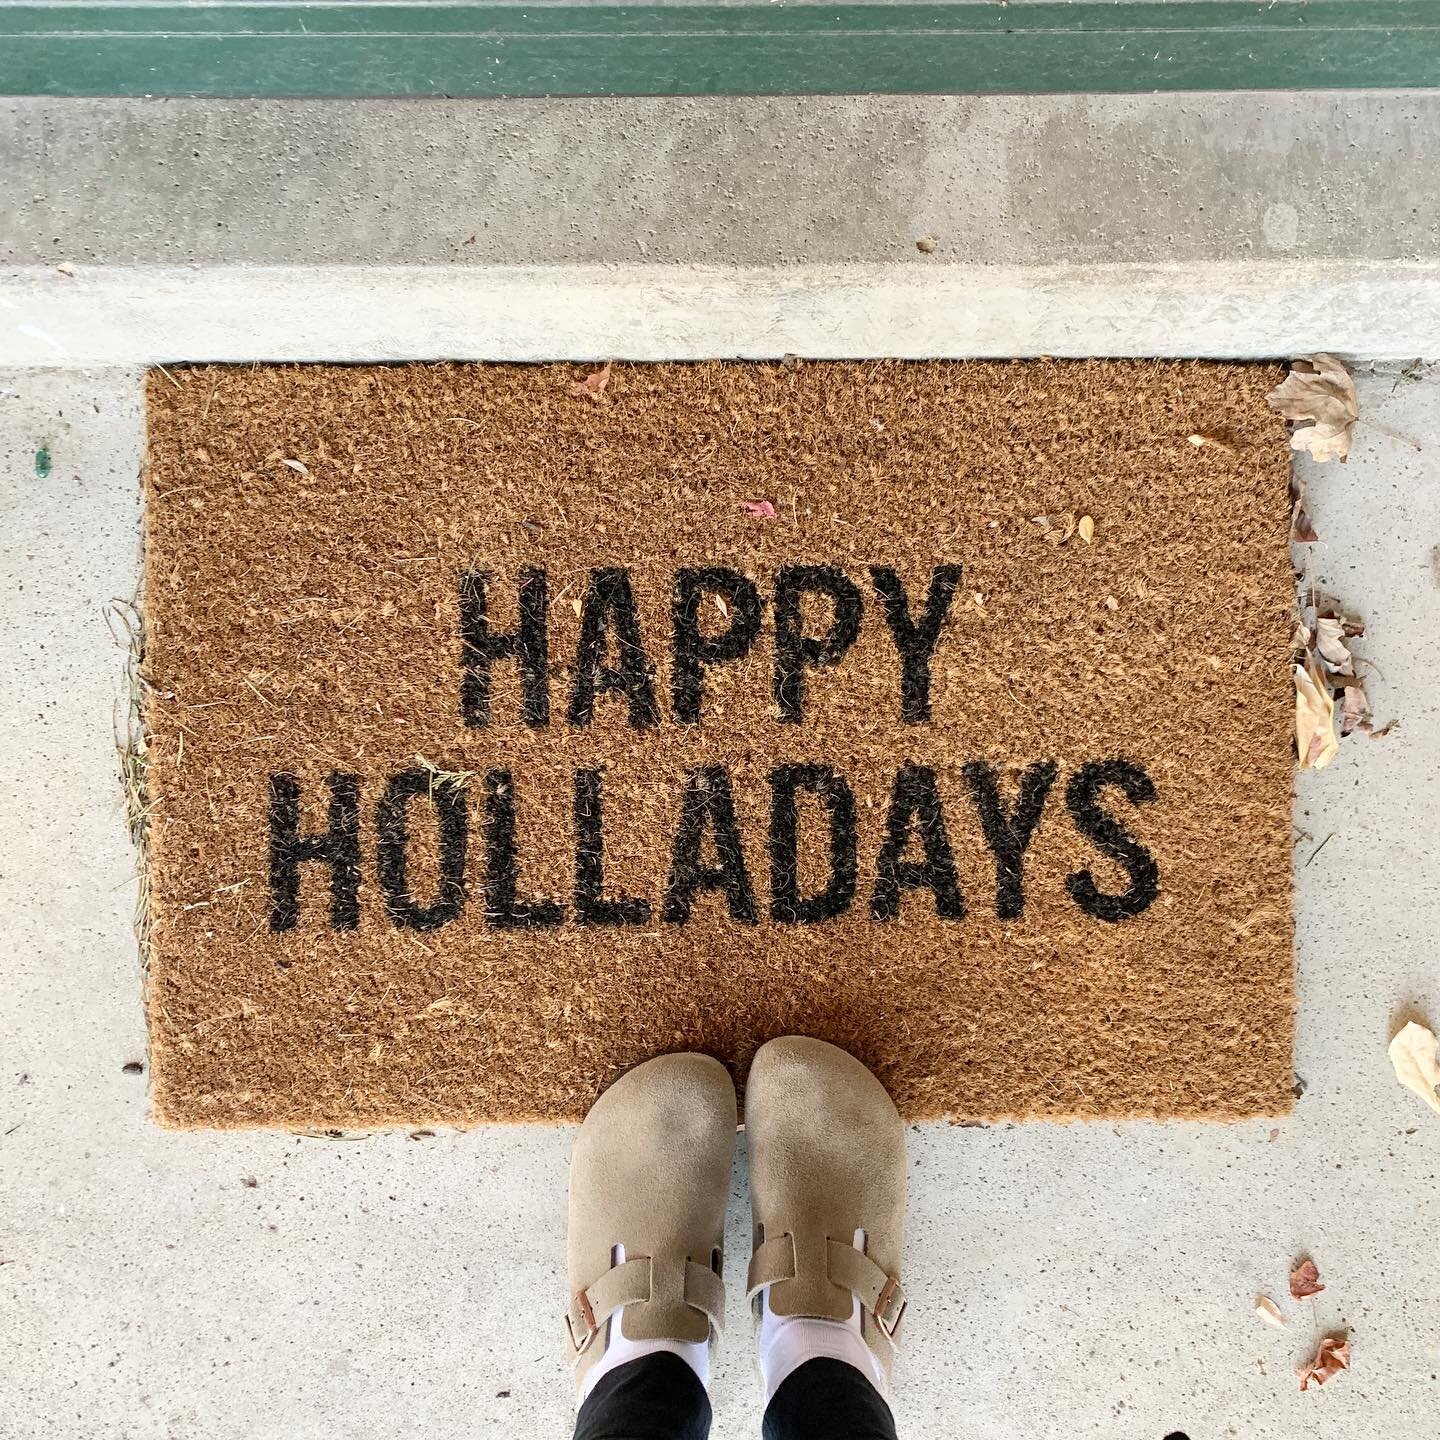 Some holiday decorations are sentimental, and some are this silly doormat. 

Happy Holladays everyone. 🎅🏻🎄